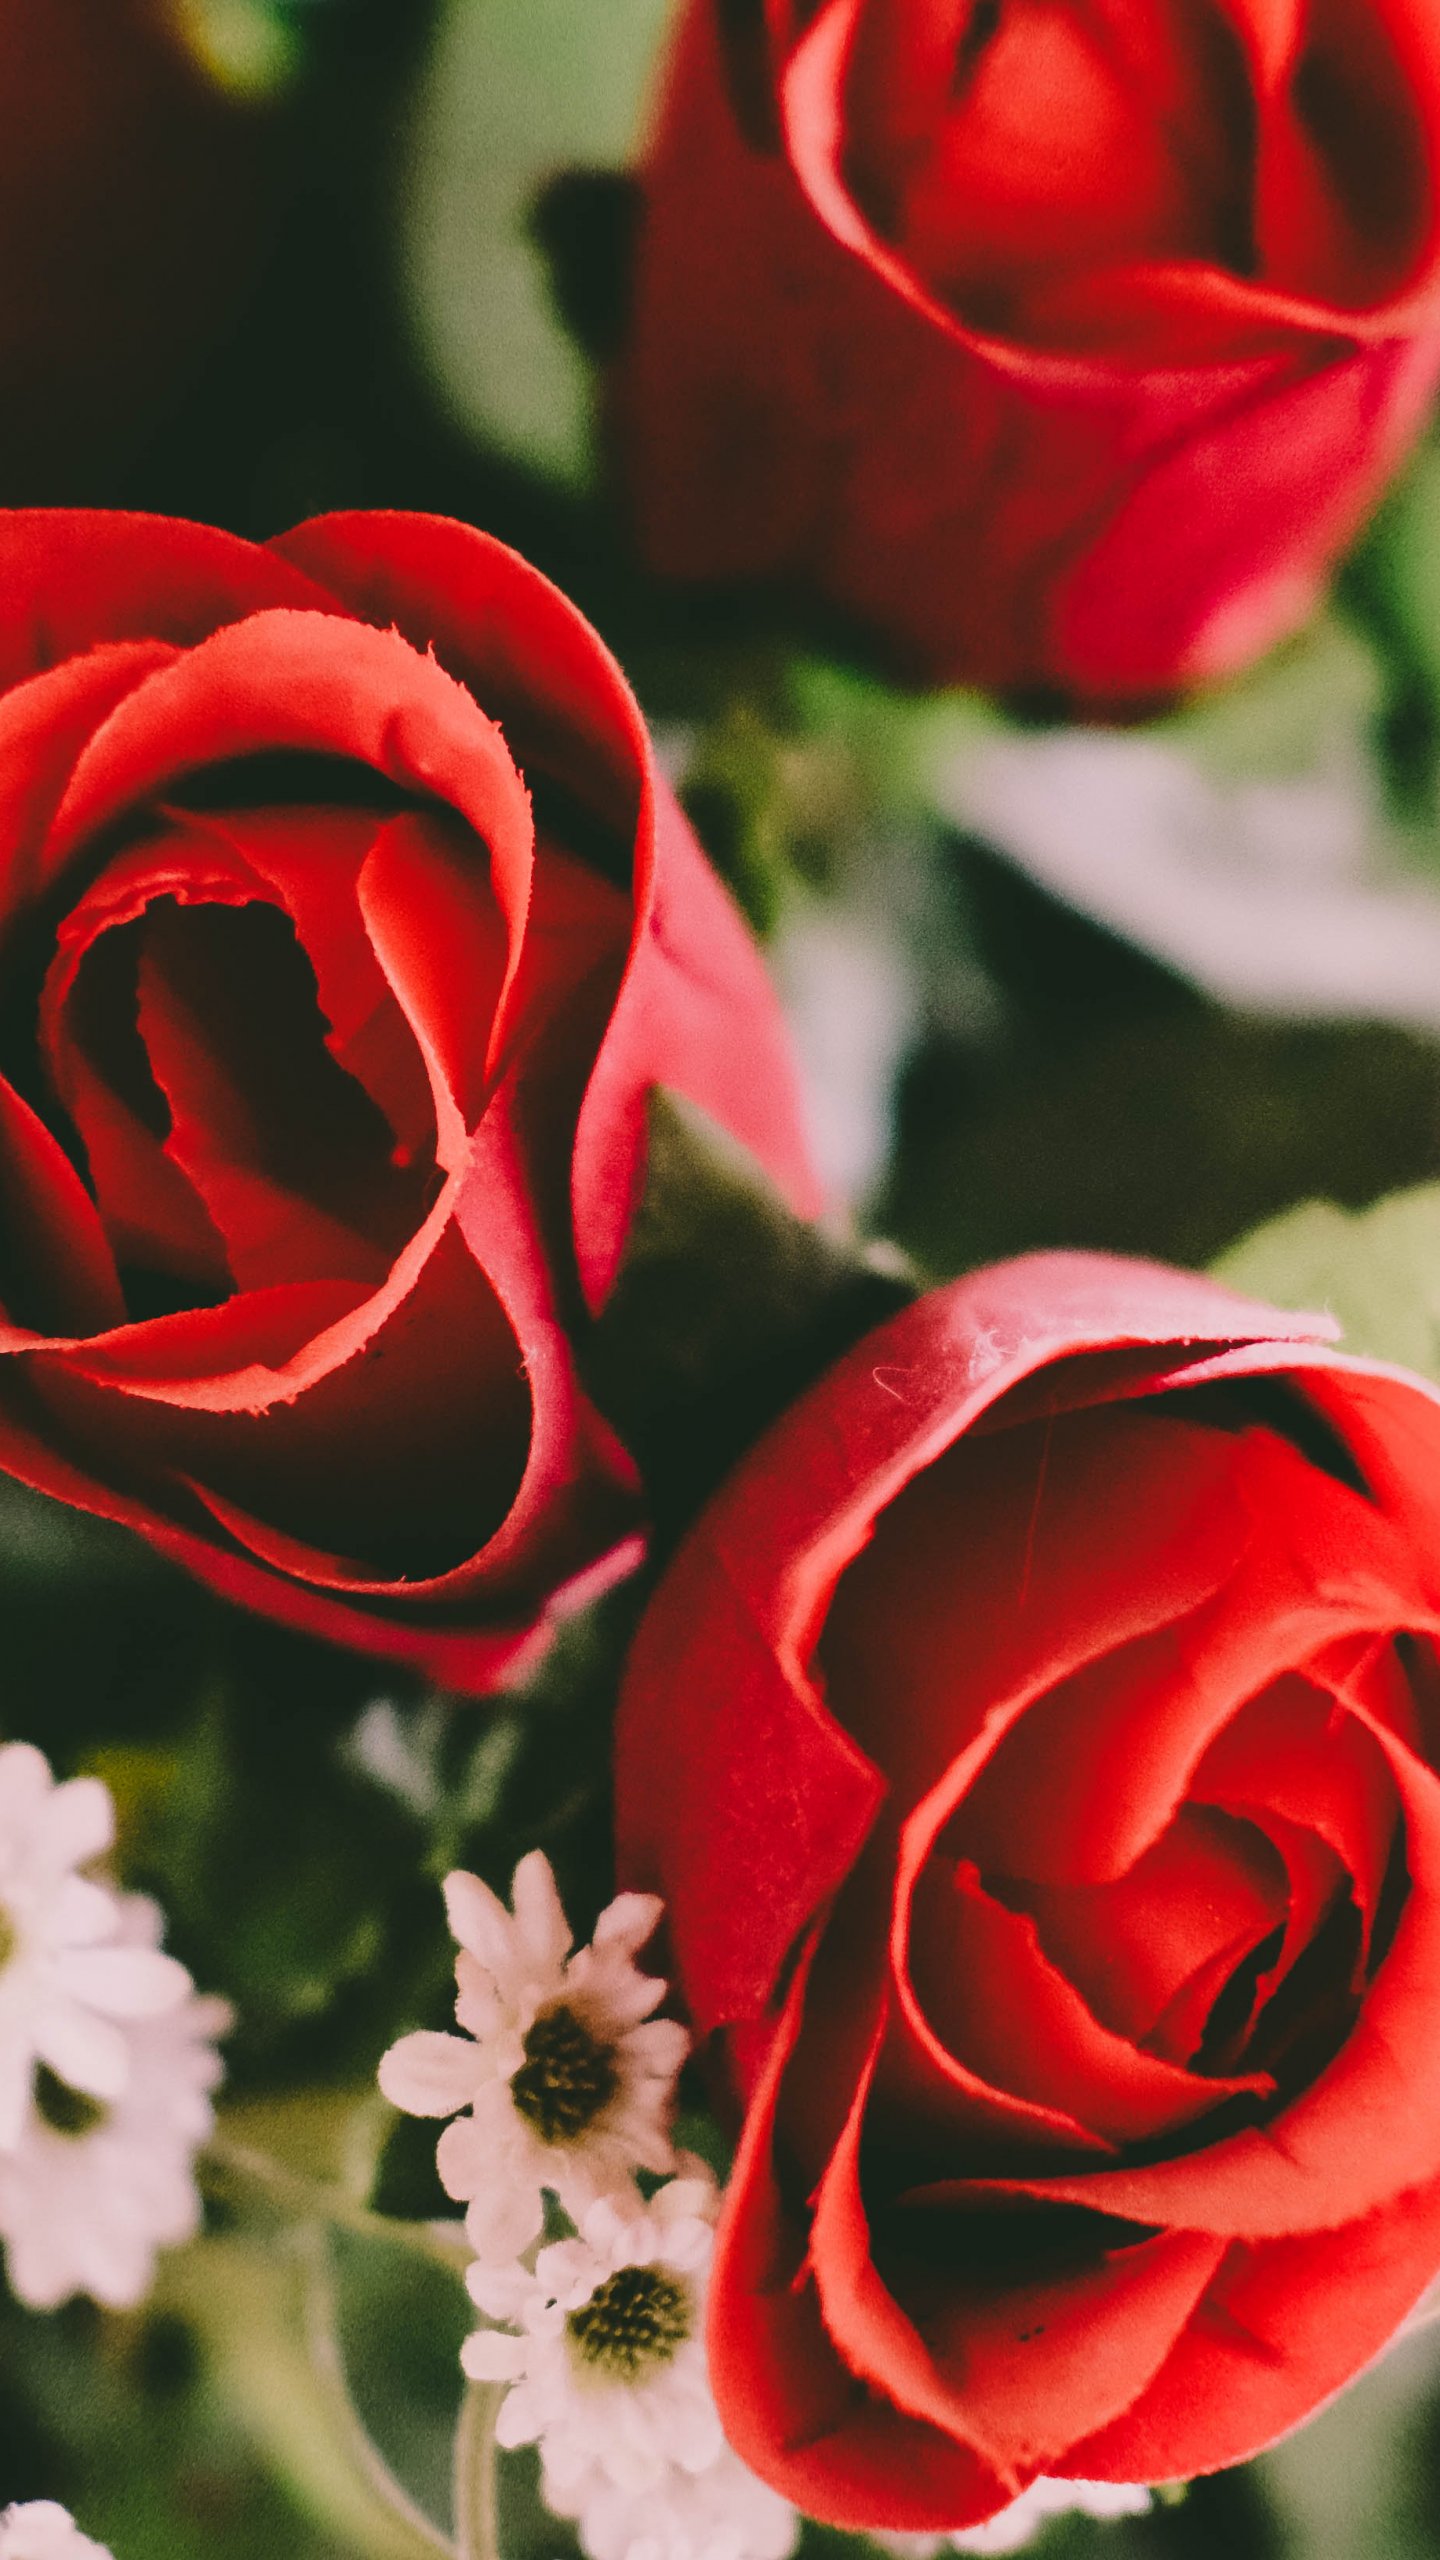 Red Roses Wallpaper - iPhone, Android & Desktop Backgrounds